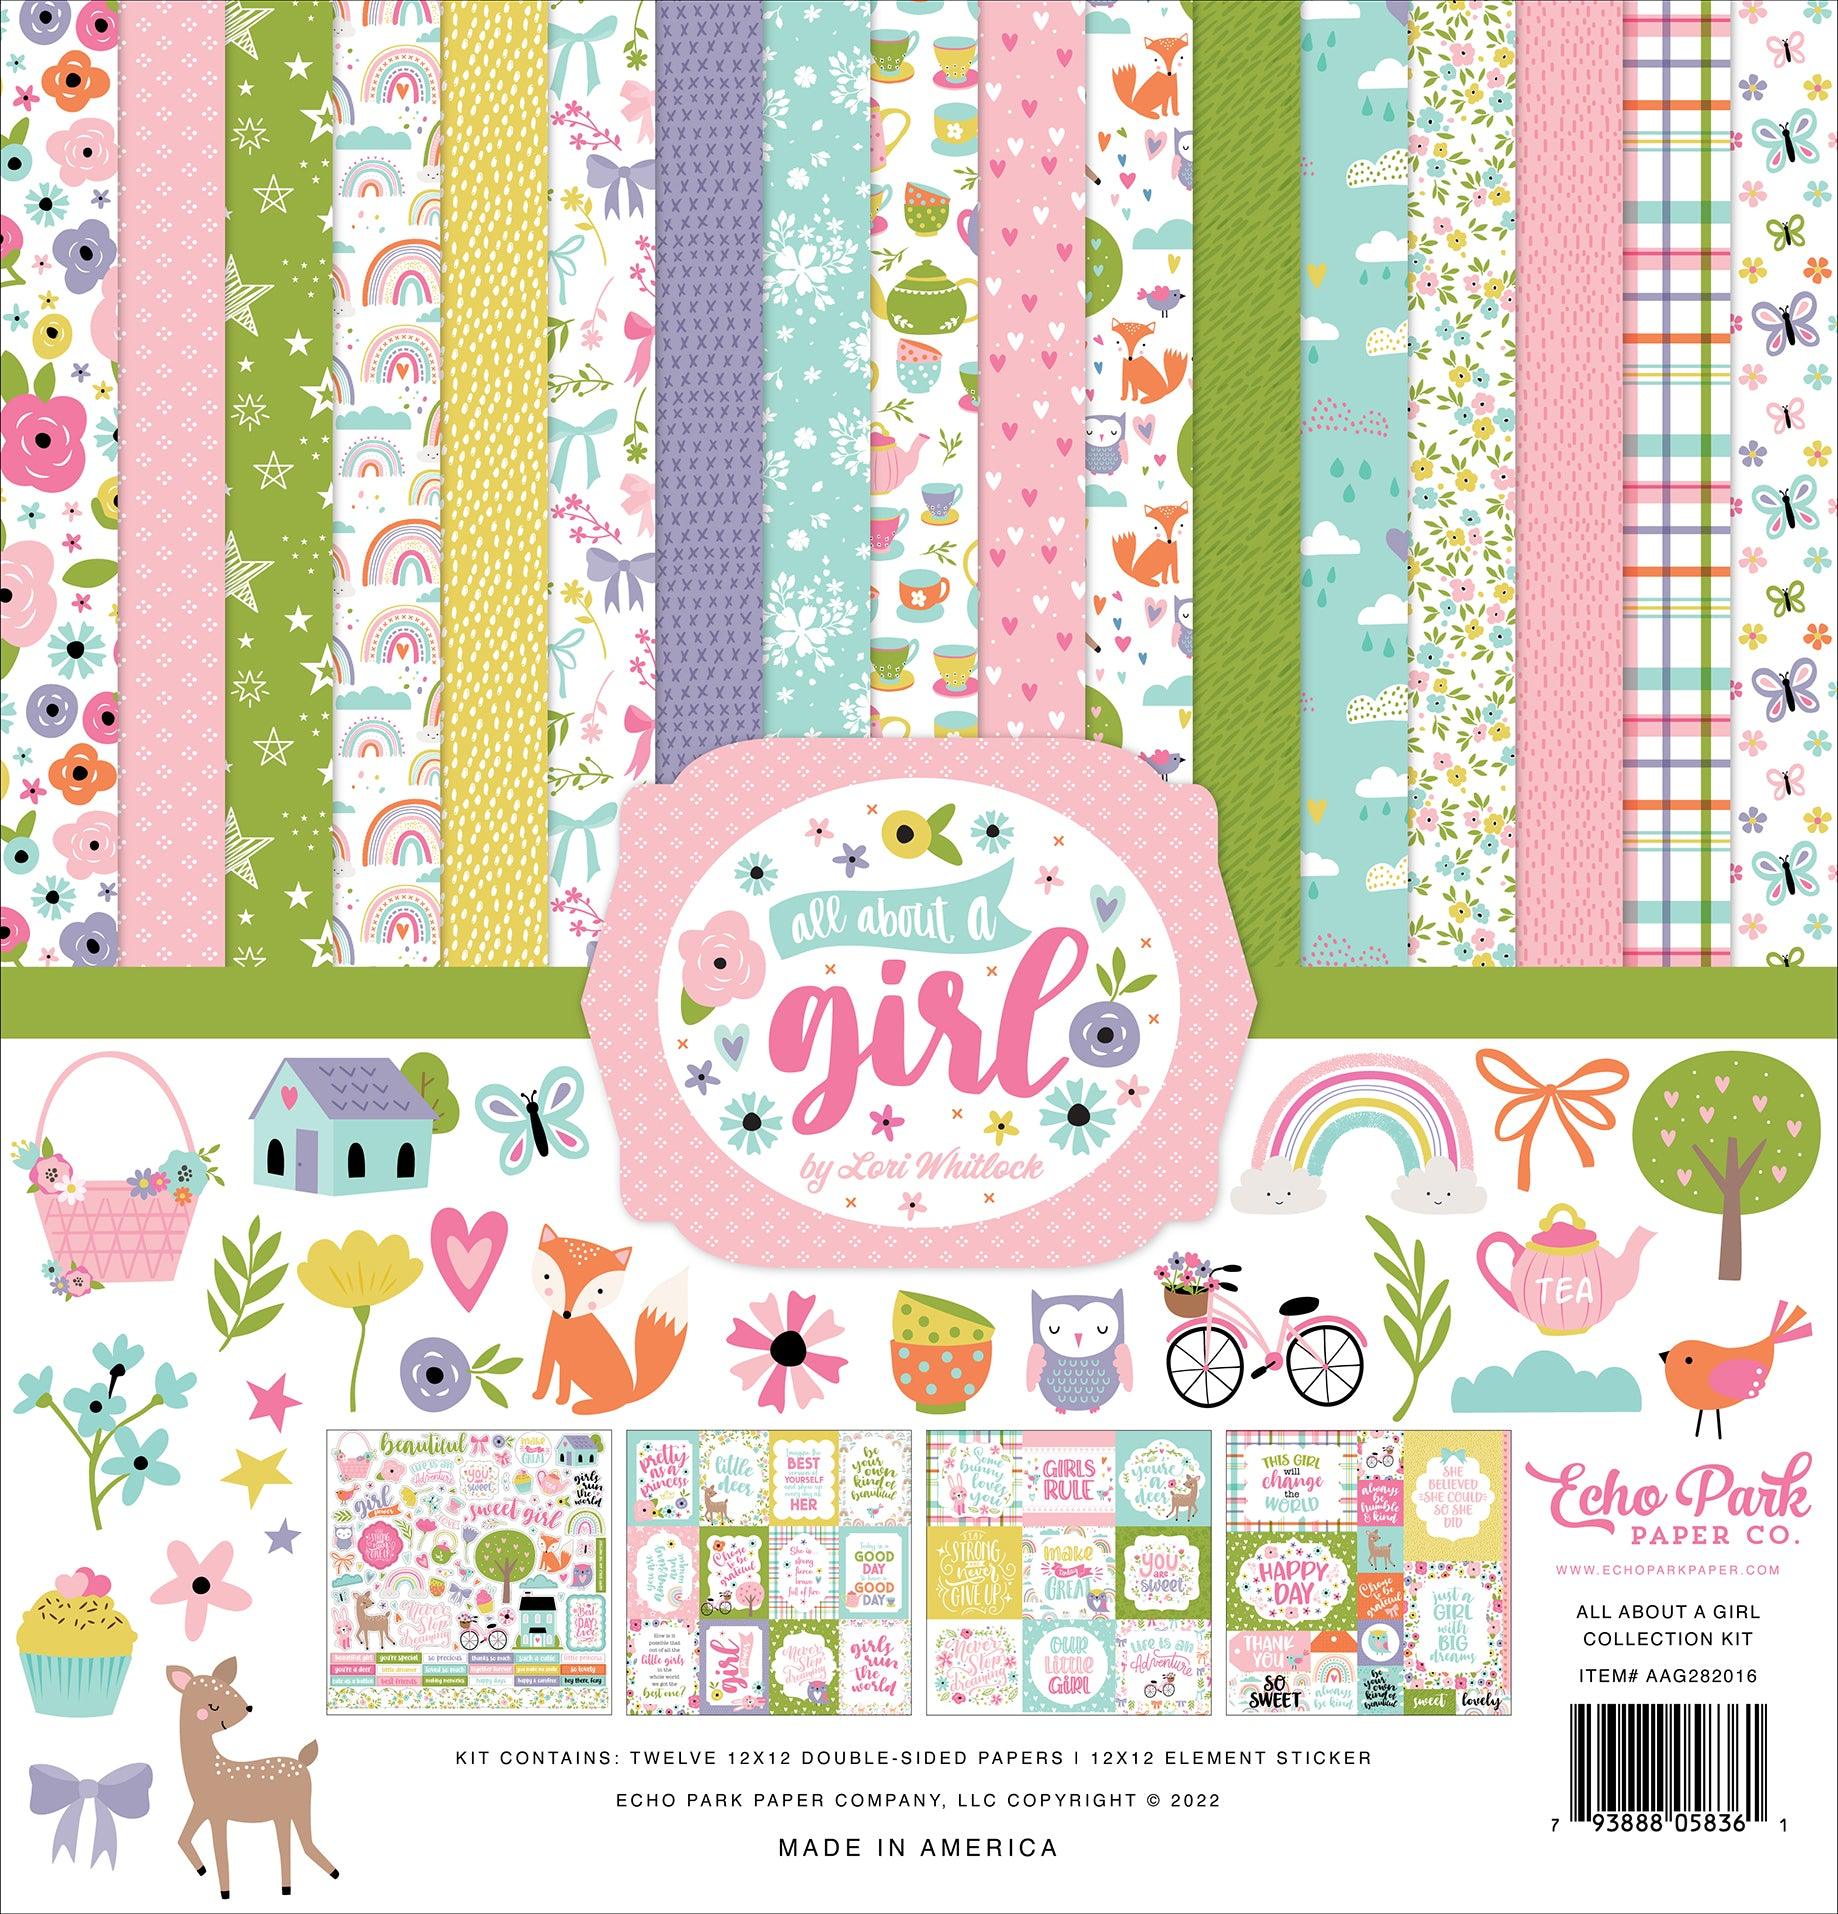 All About A Girl Collection 12 x 12 Scrapbook Paper & Sticker Pack by Echo Park Paper - Scrapbook Supply Companies